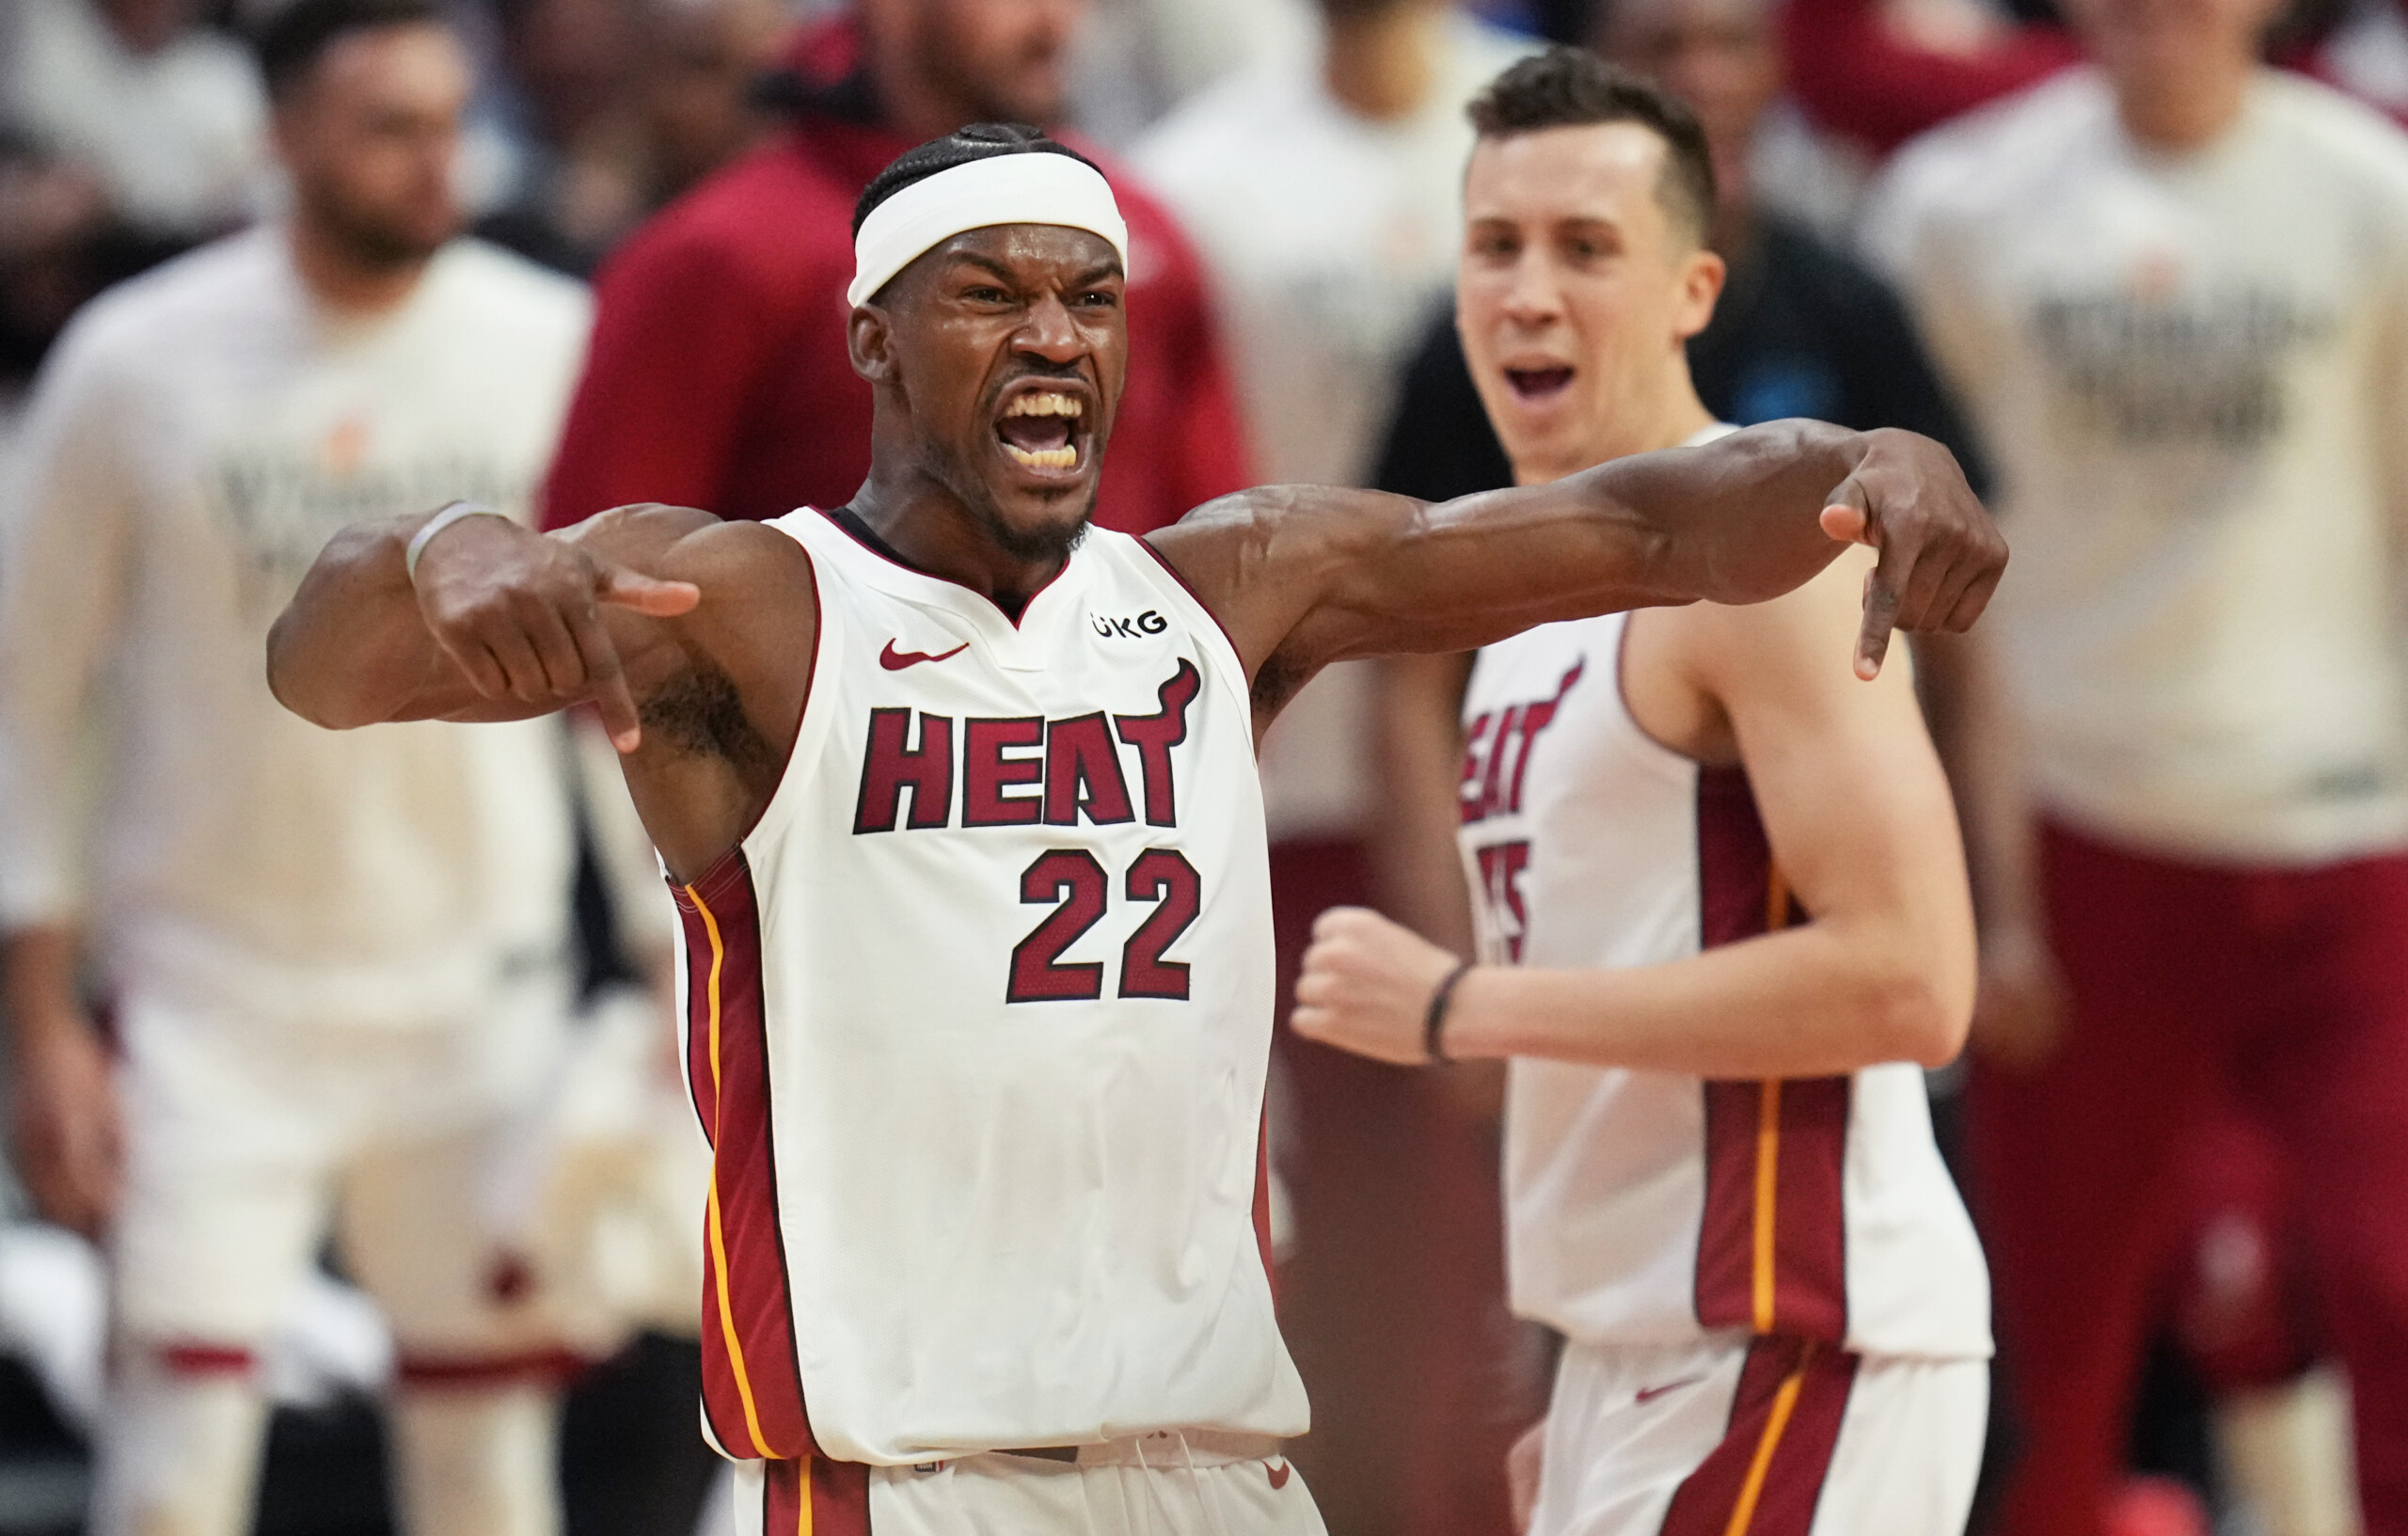 The Evolution of Miami Heat Uniforms throughout Franchise History